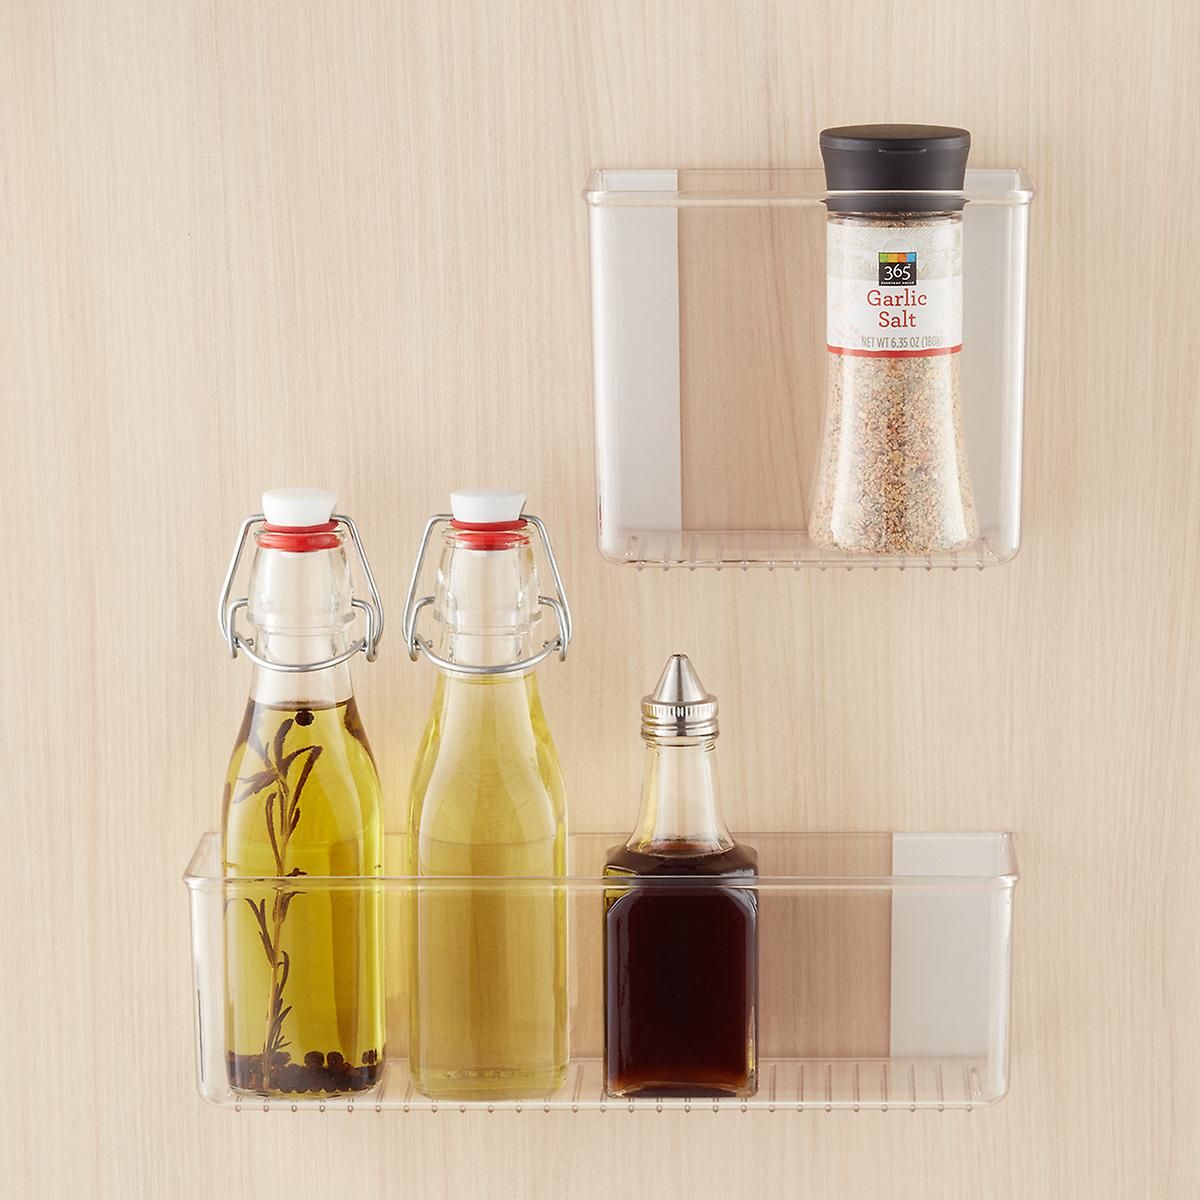 iDESIGN Affixx Adhesive Organizer Bin Clear | The Container Store